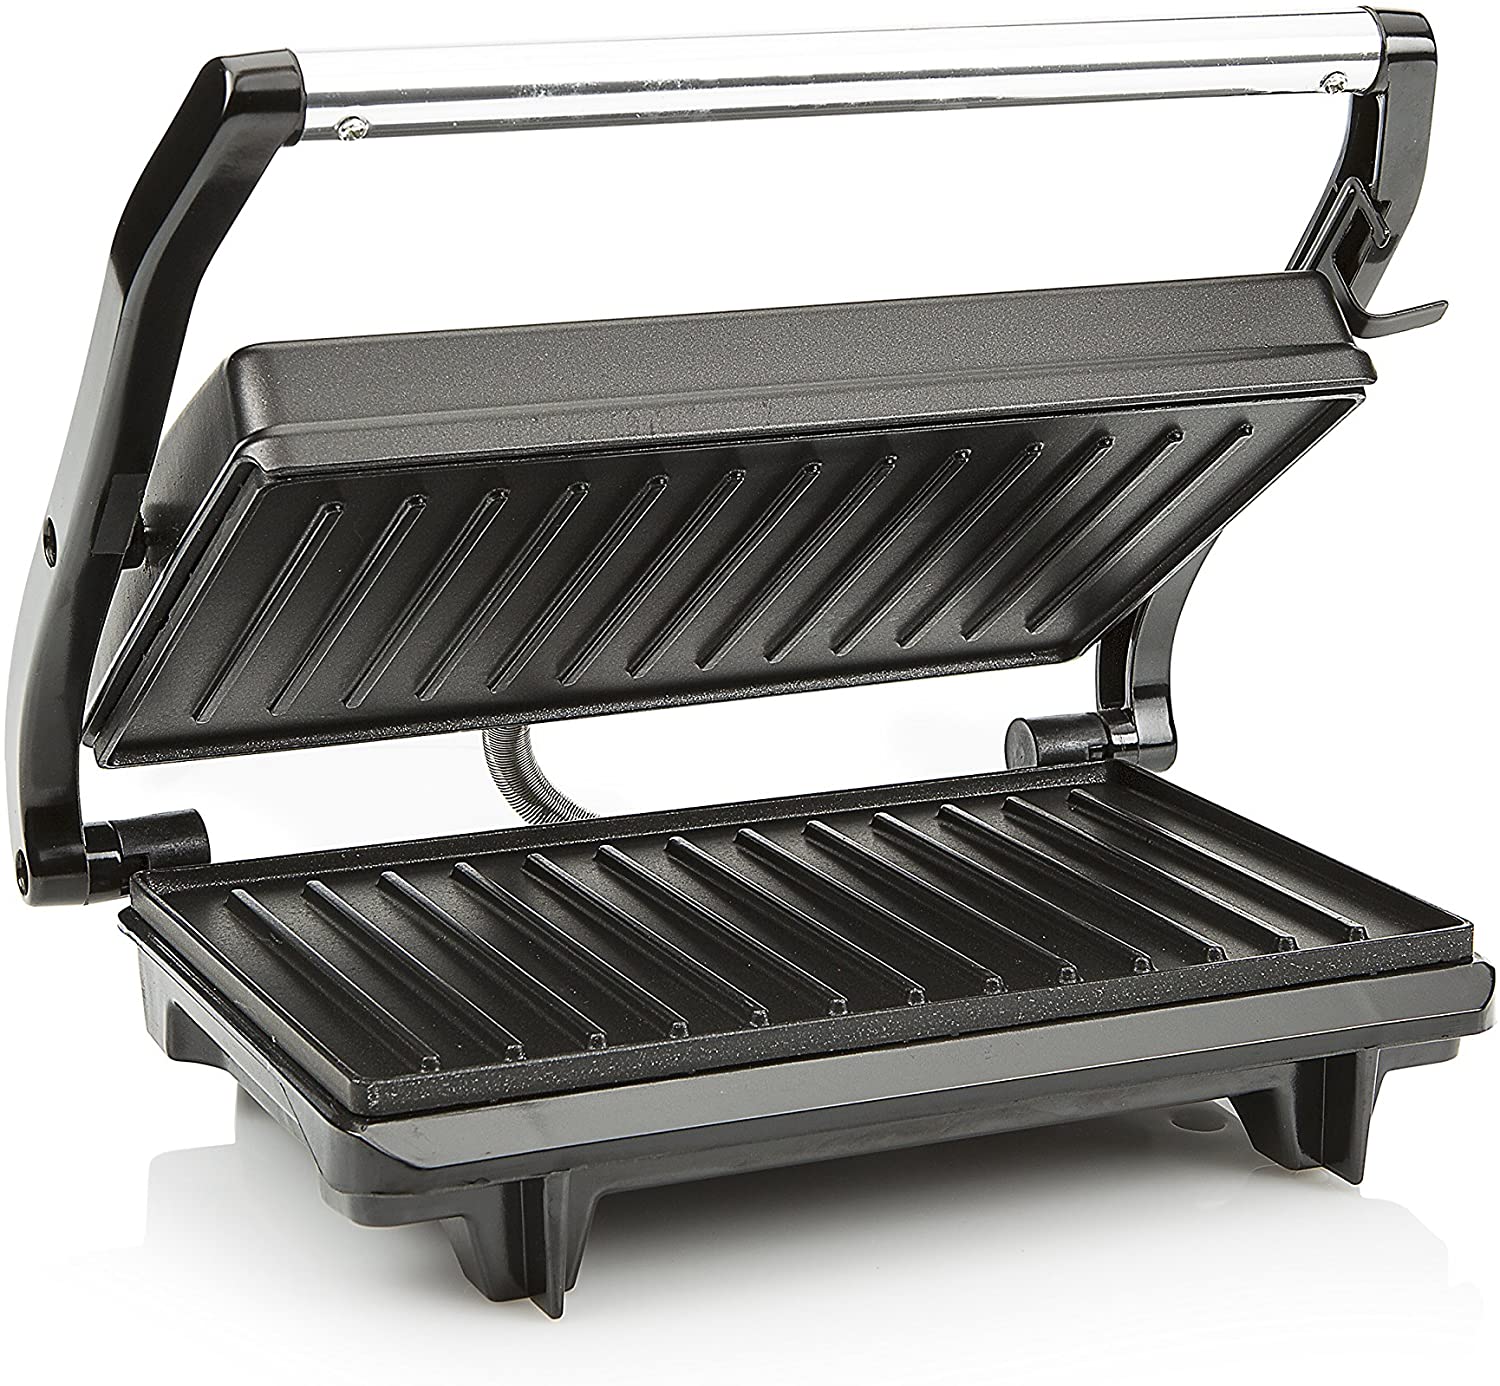 Tristar GR-2650 Contact Grill - Non-stick coating - Movable lid